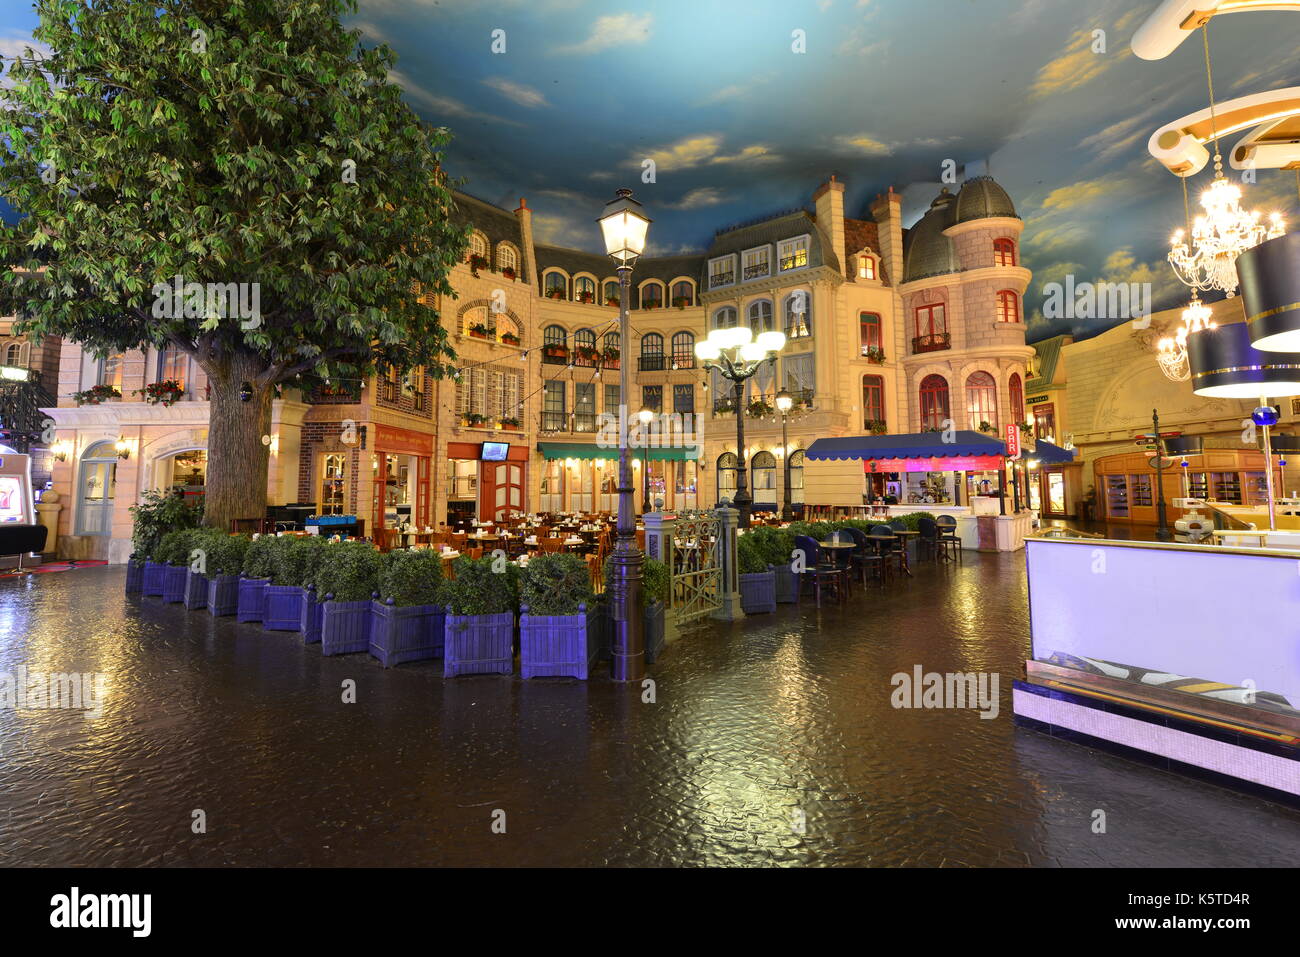 The Check in Area of the Paris Hotel in Las Vegas Stock Photo - Alamy